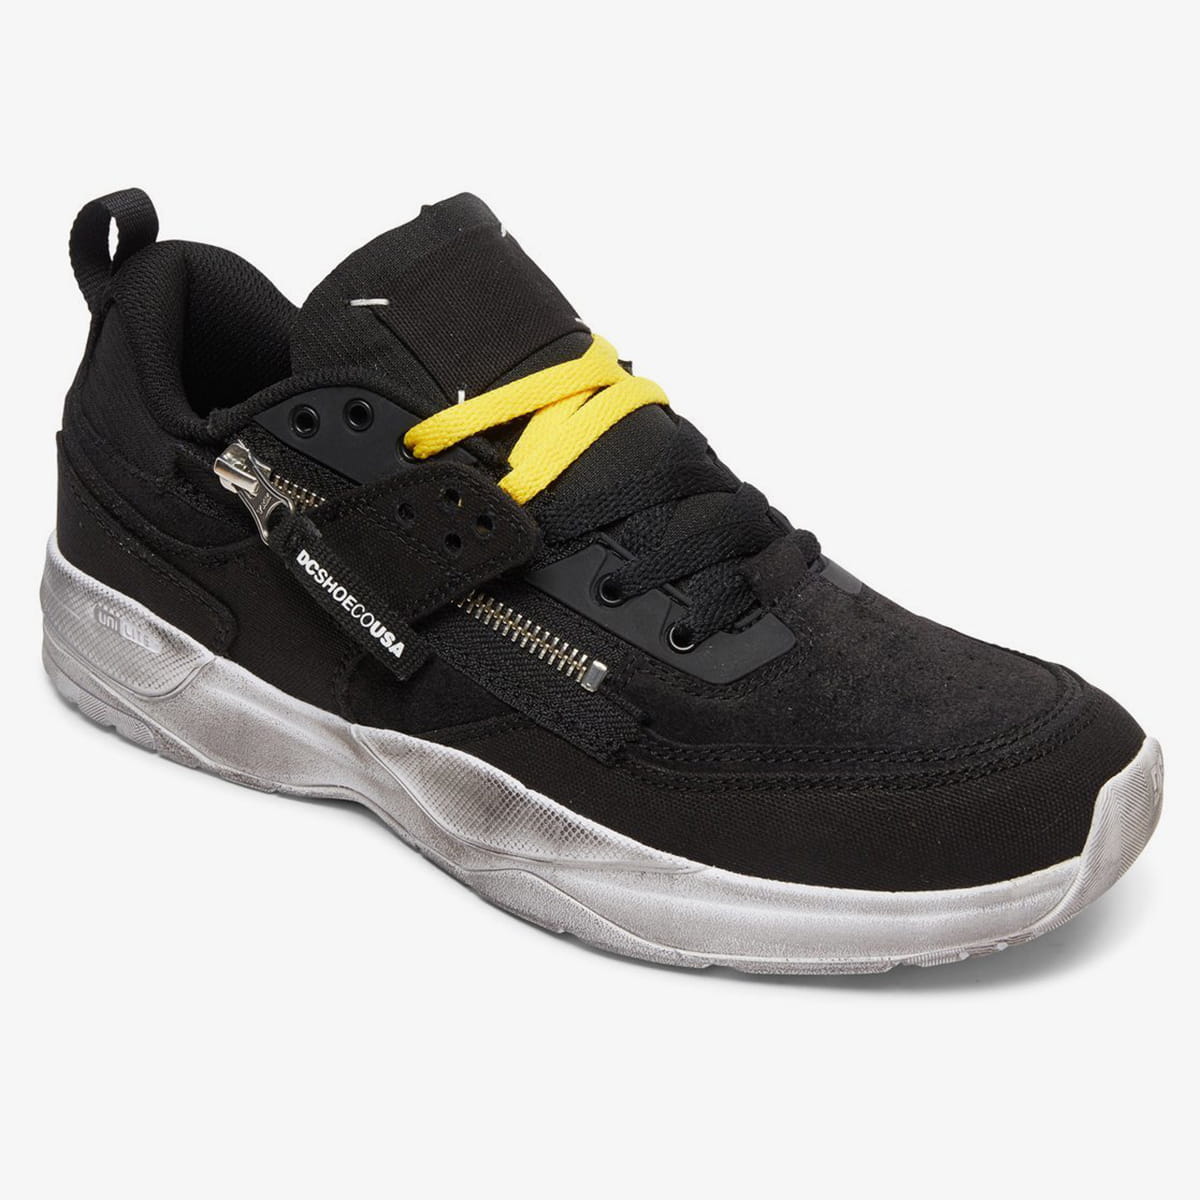 dc yellow shoes